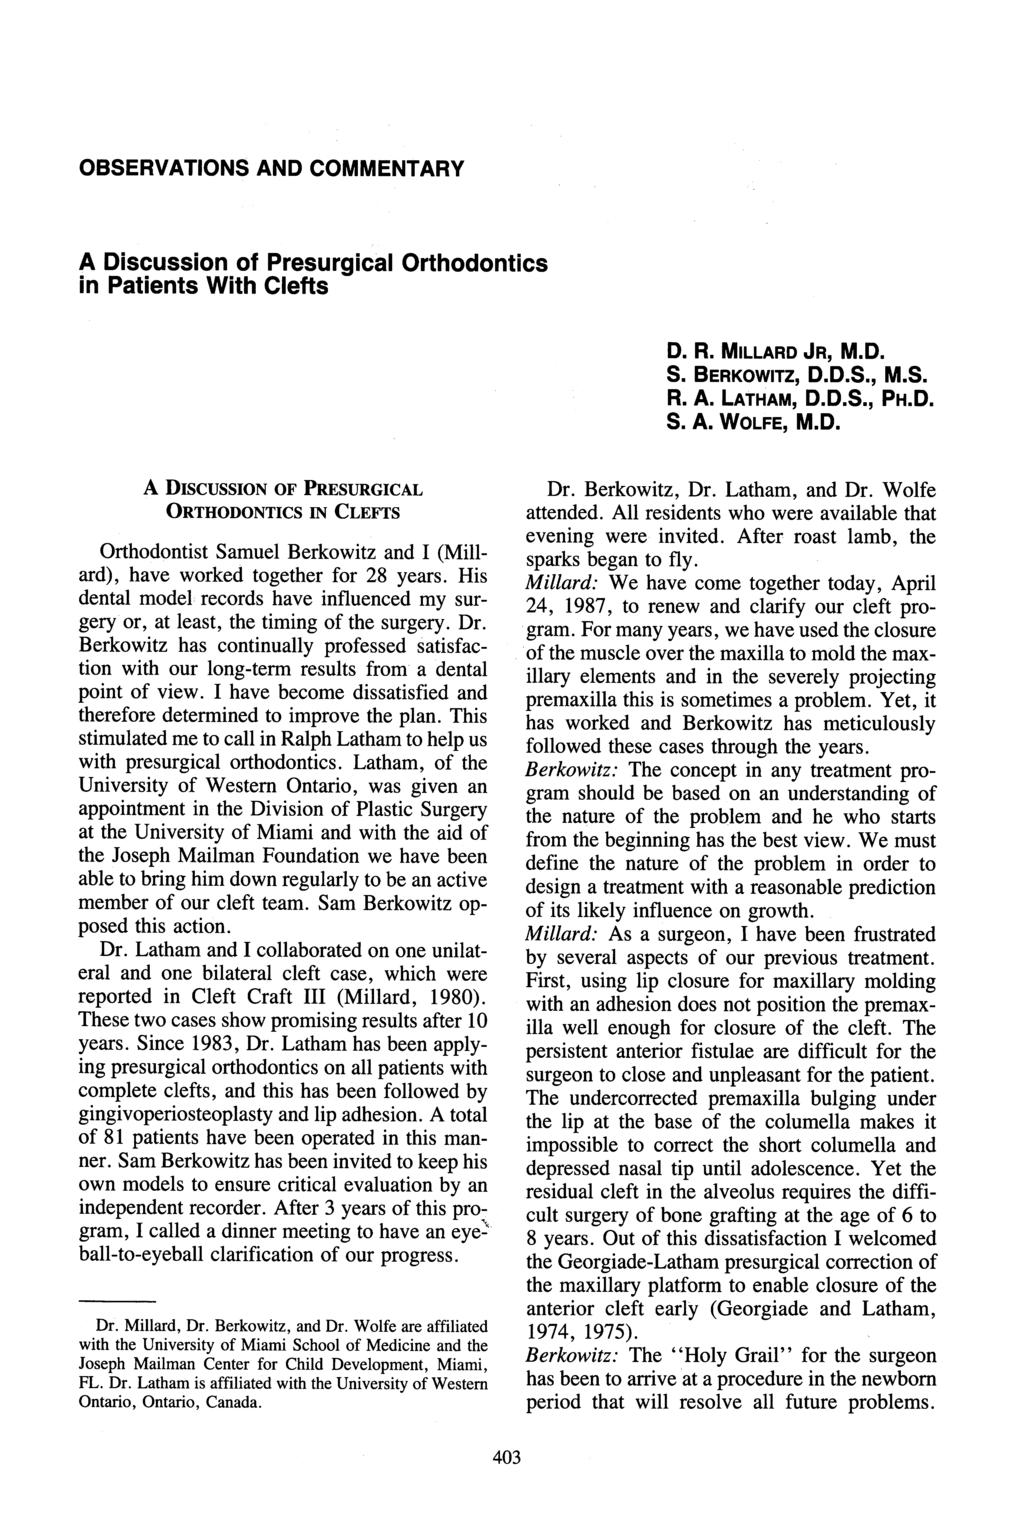 _ OBSERVATIONS AND COMMENTARY A Discussion of Presurglcal Orthodontics in Patients With Clefts D. R. Miccarp Jr, M.D. S. Berkowitz, D.D.S., M.S. R. A. LatHam, D.D.S., PH.D. S. A. WoLre, M.D. A DIscUssION OF PRESURGICAL ORTHODONTICS IN CLEFTS Orthodontist Samuel Berkowitz and I (Millard), have worked together for 28 years.